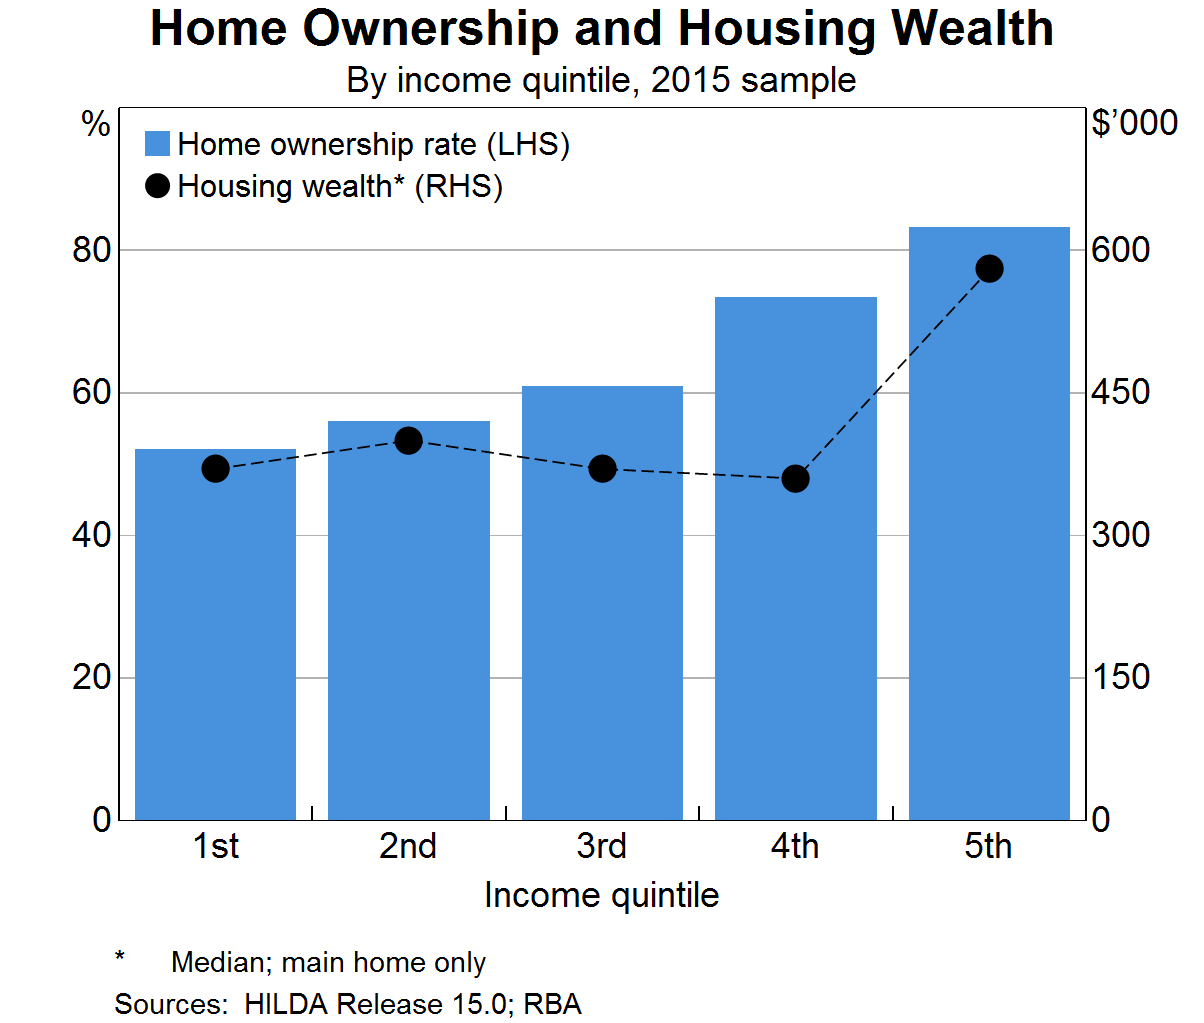 Graph 2: Home Ownership and Housing Wealth (by income)